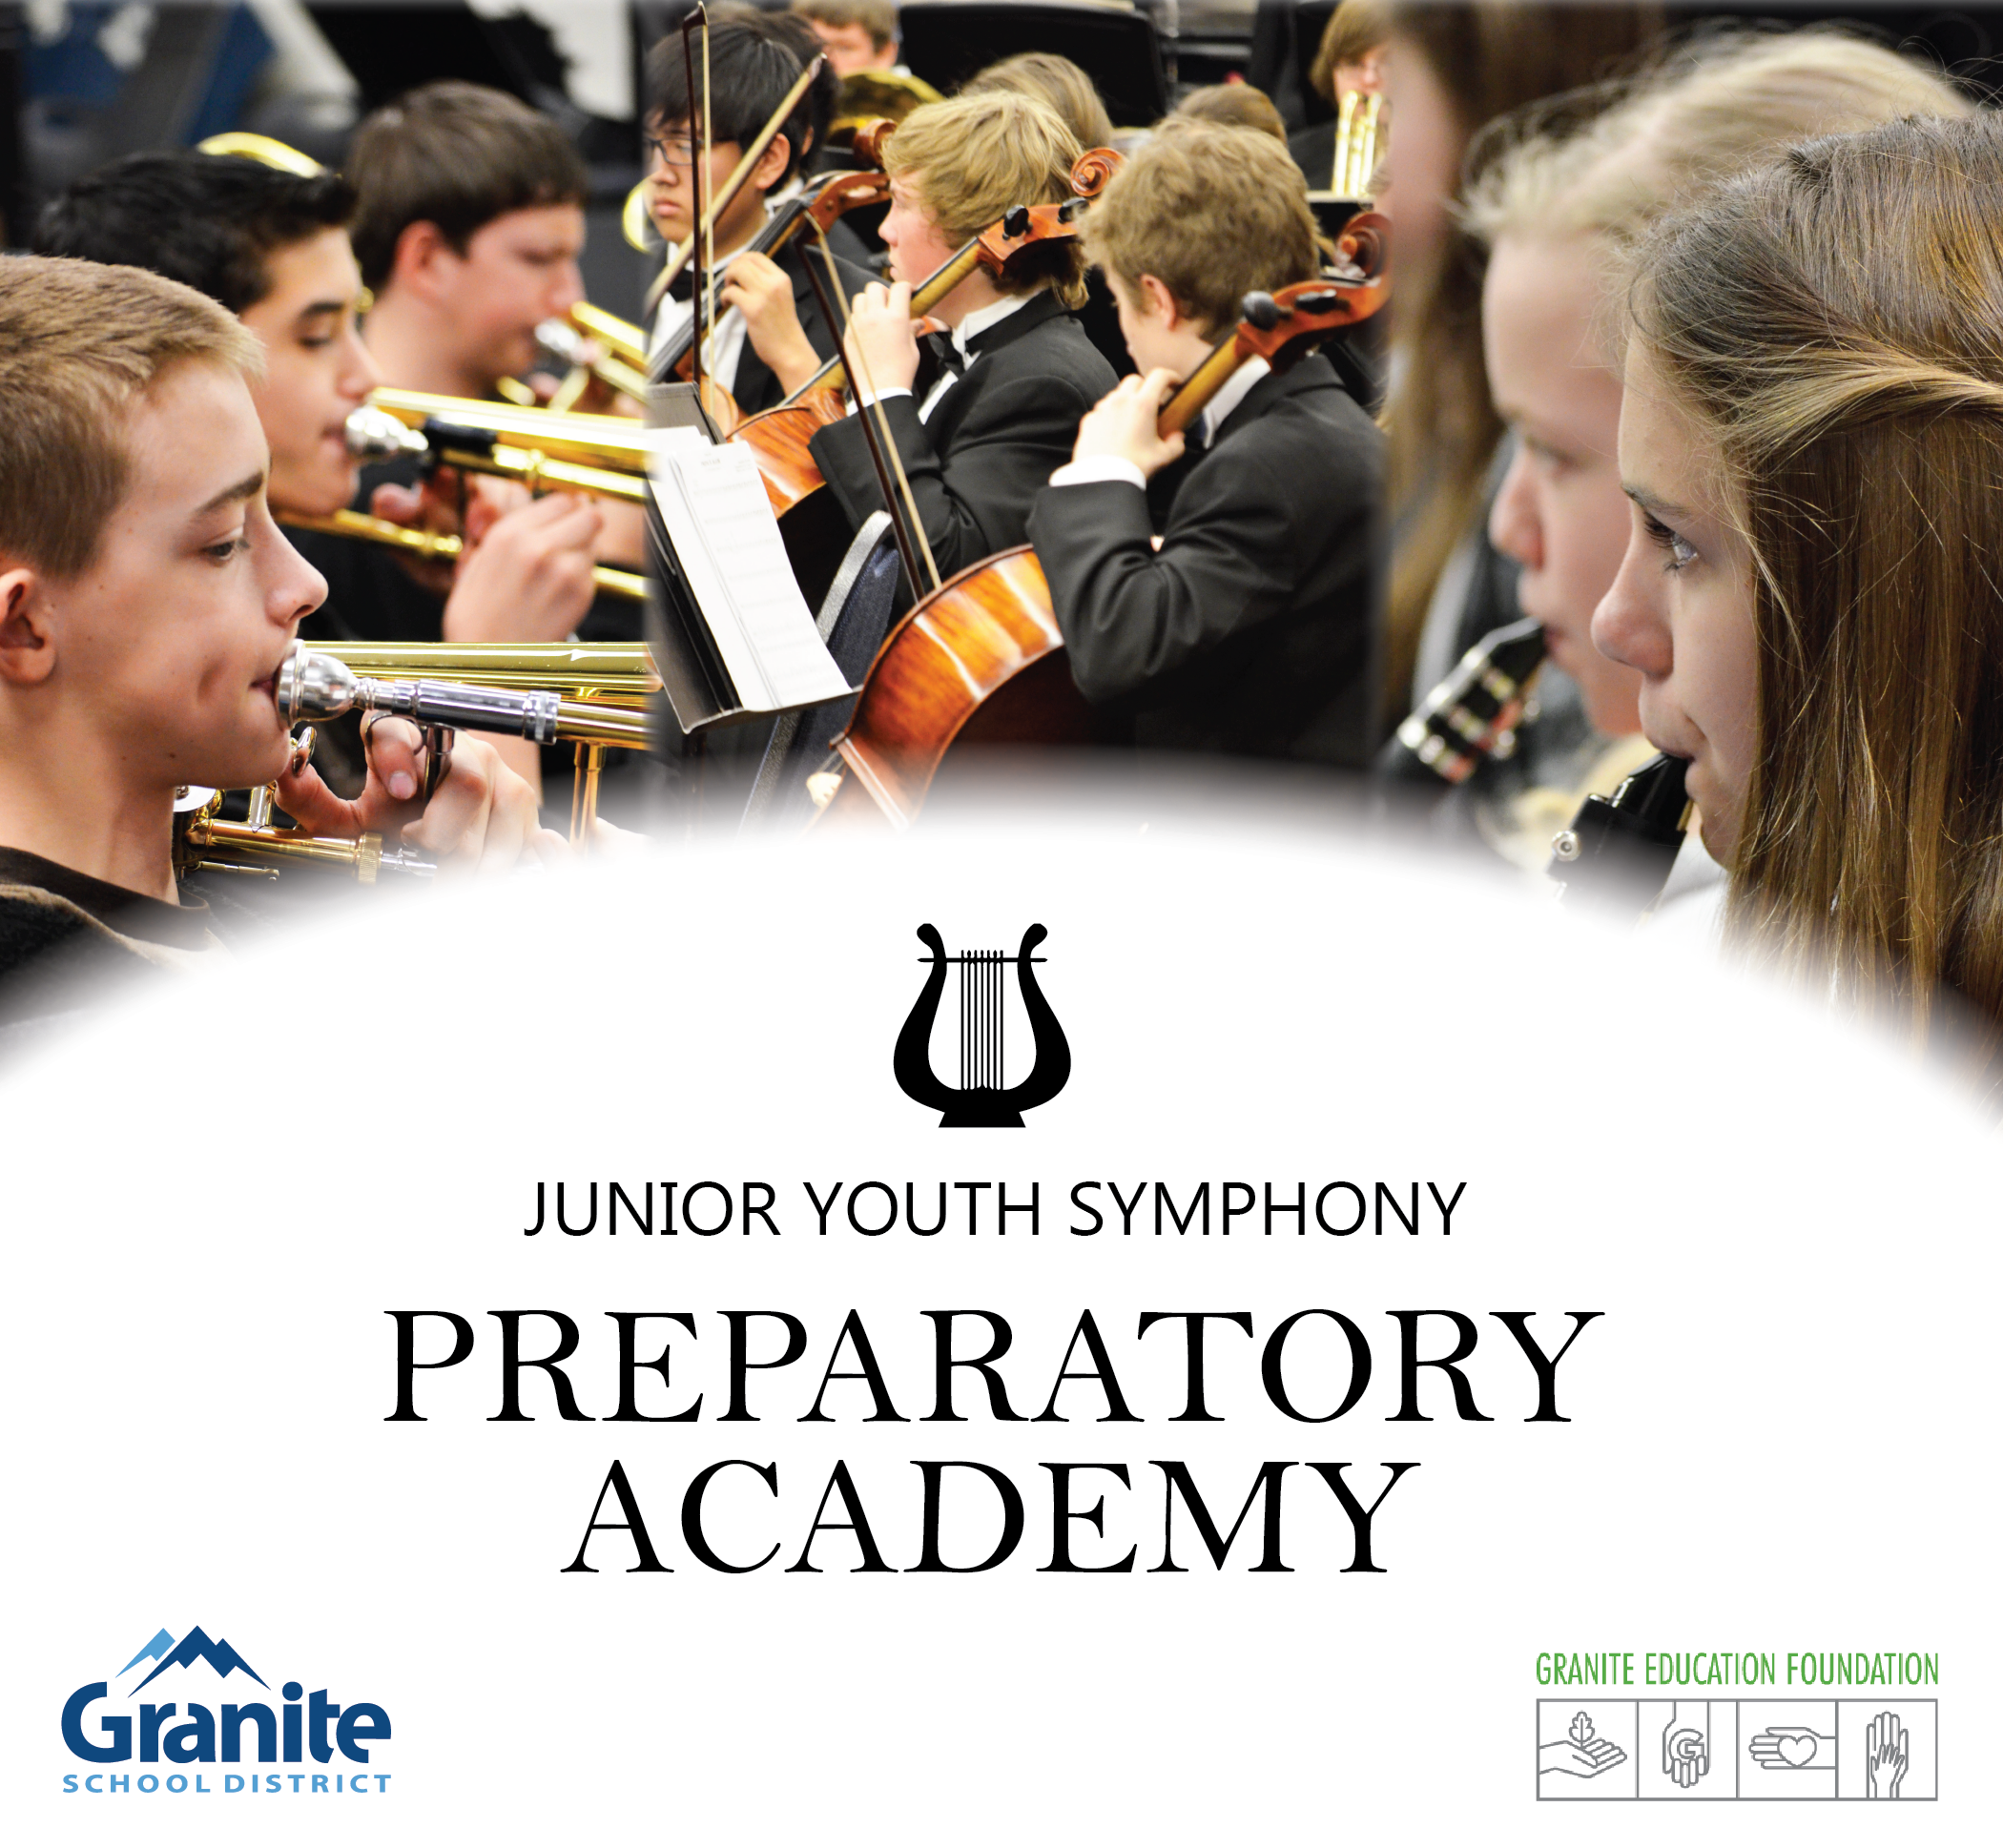 Sign up your sixth-grader for the Junior Youth Symphony Preparatory Academy